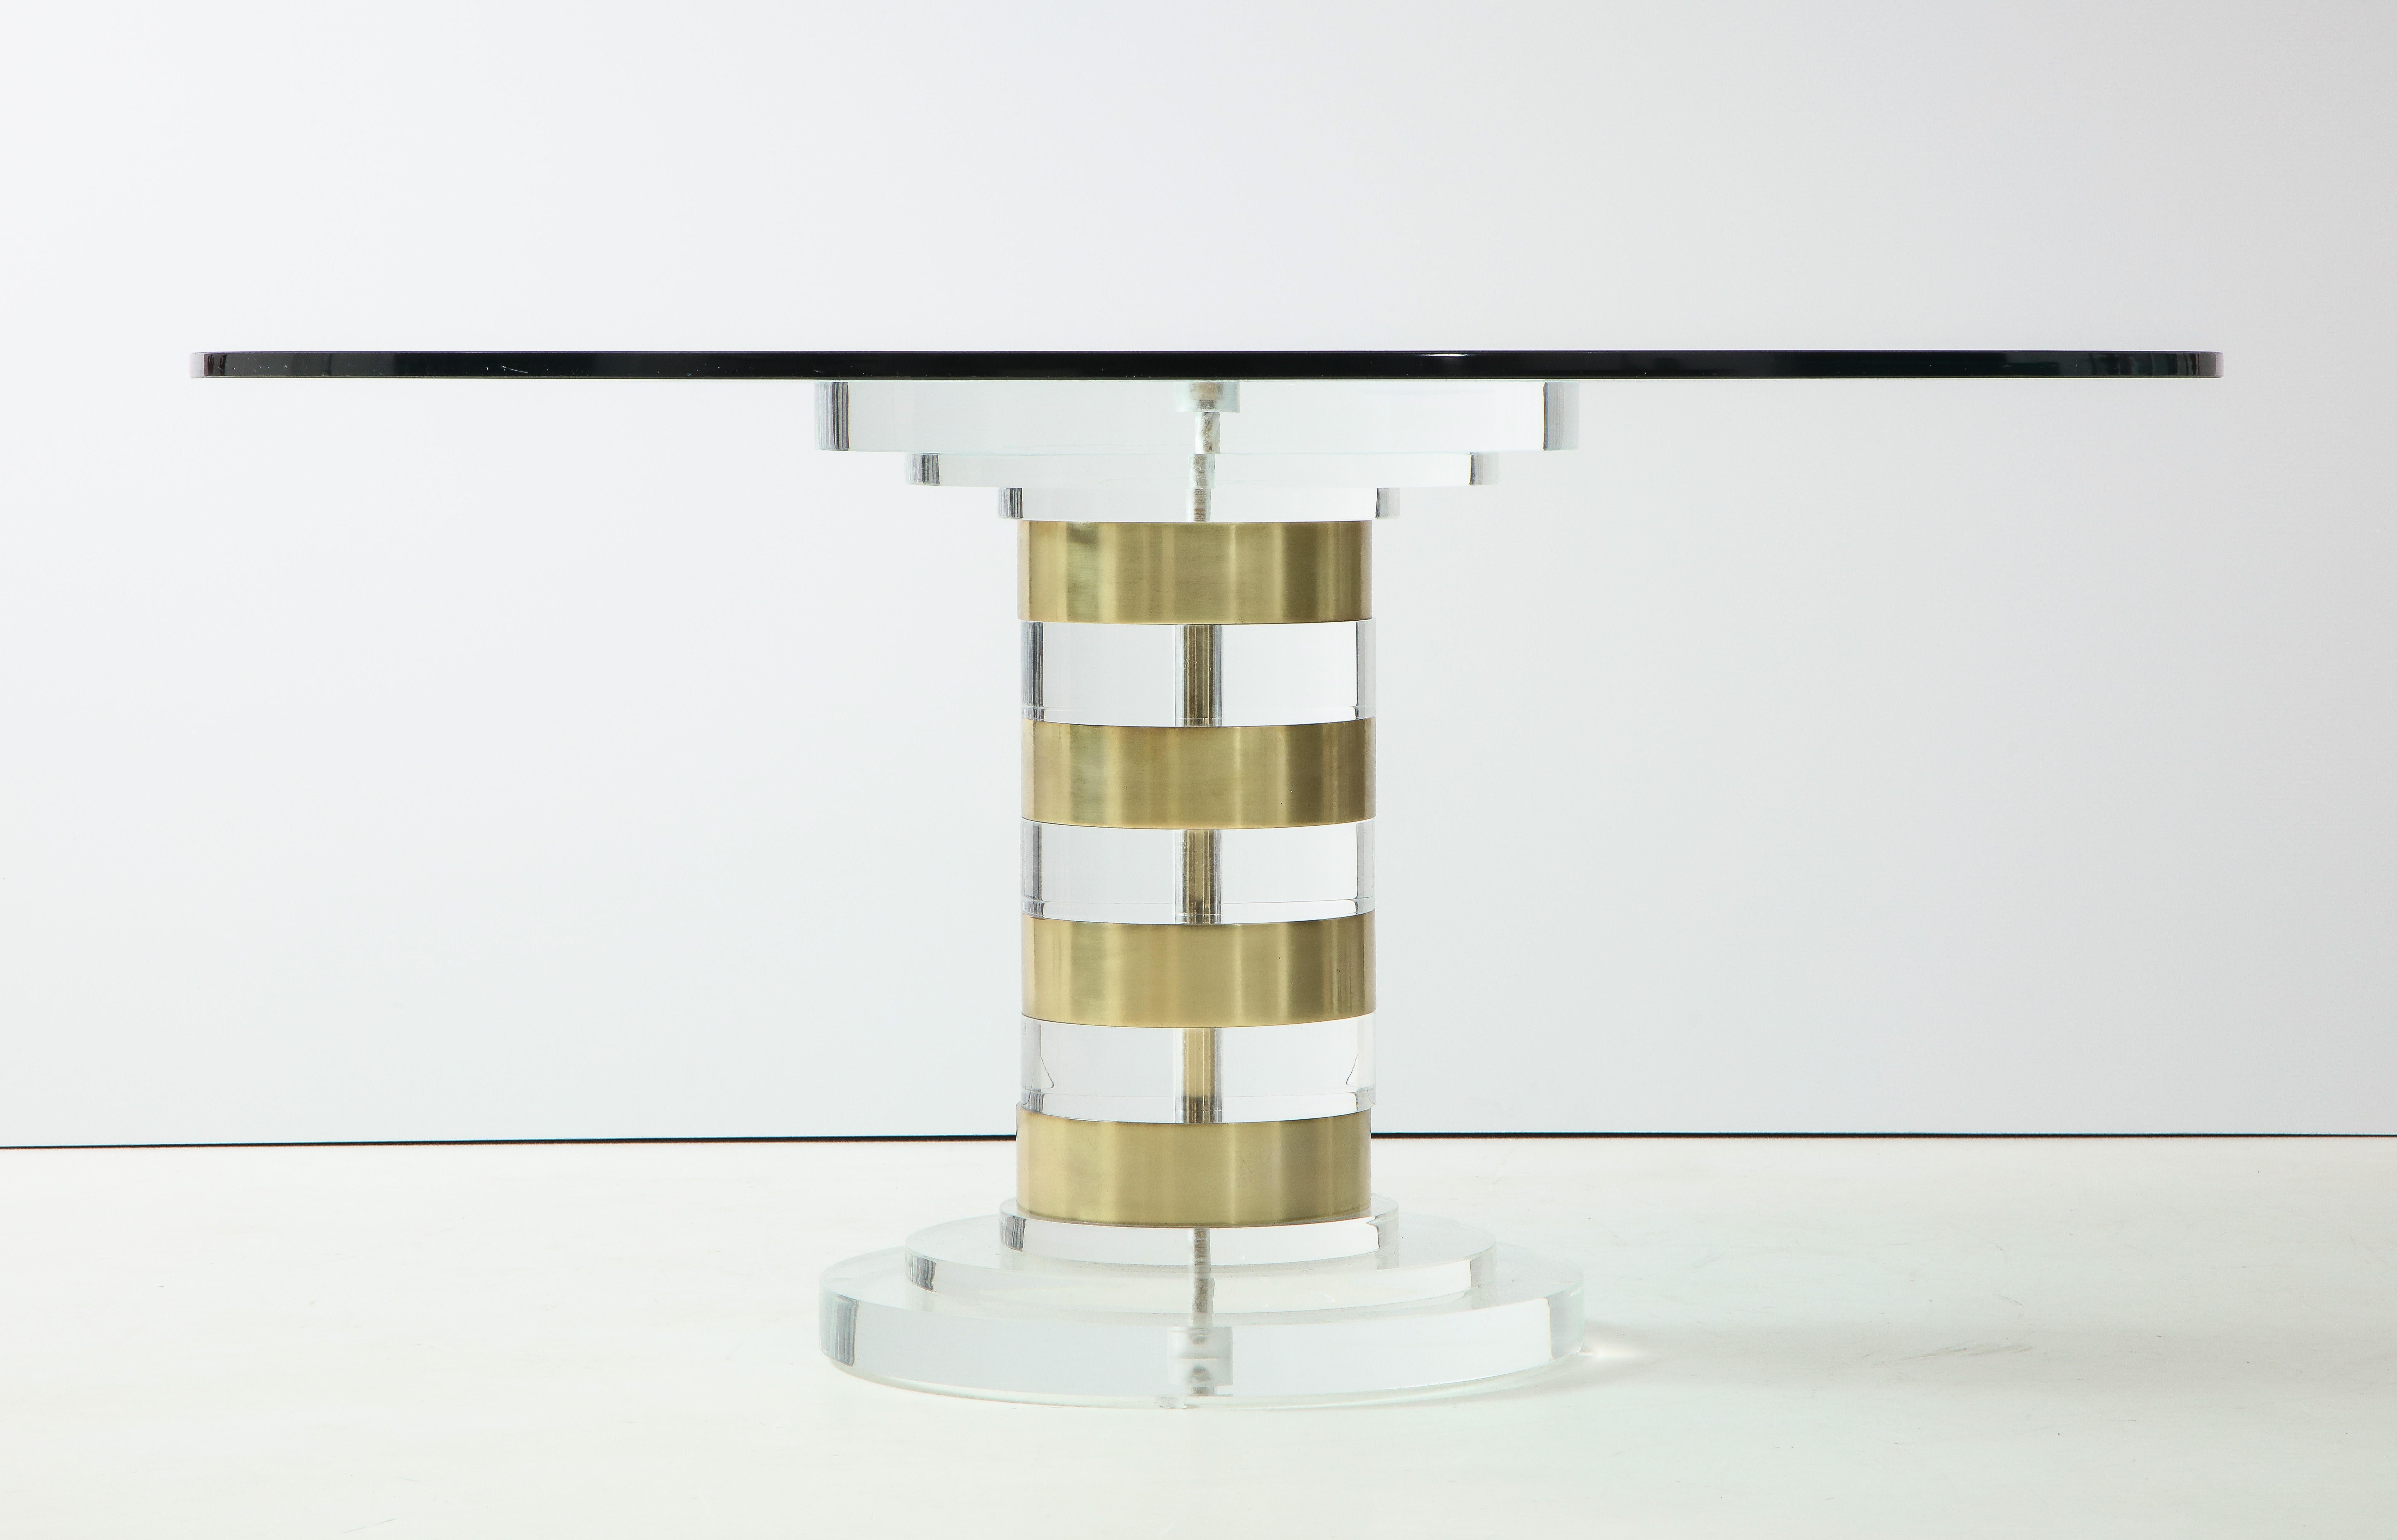 Beautiful Lucite and brass dining table / side table by Lion in Frost.
The table can be used as a dining table or a side table and comes with a 54